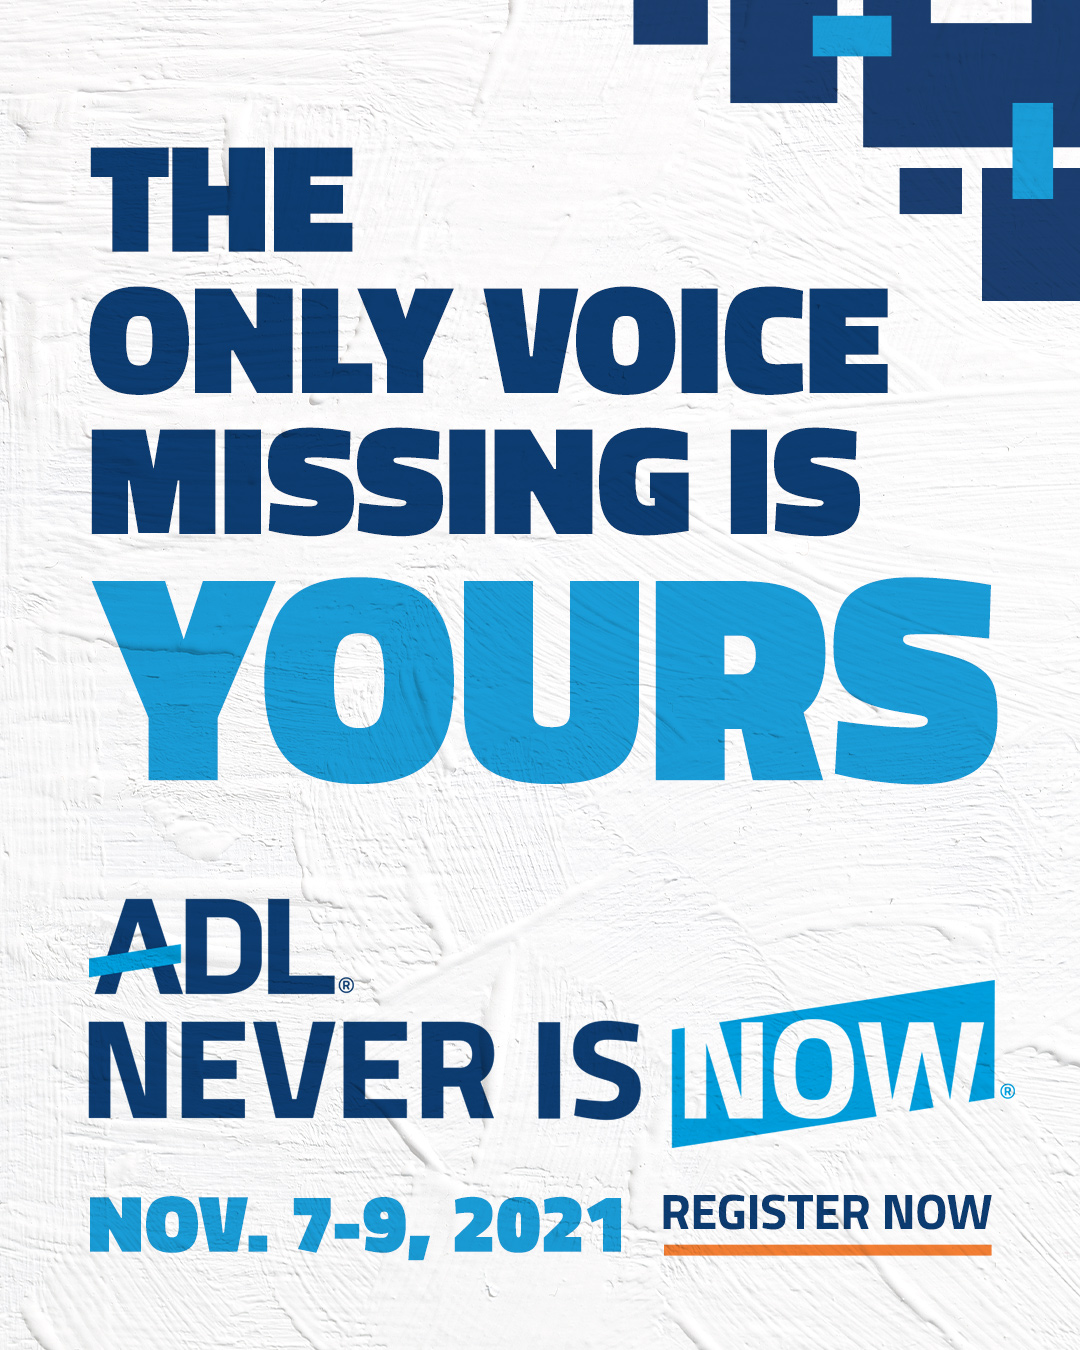 on Twitter: "Join us in the fight against antisemitism and hate at this year's #NeverIsNow, ADL's Virtual Summit. There has never been a more crucial time to have this conversation. Visit